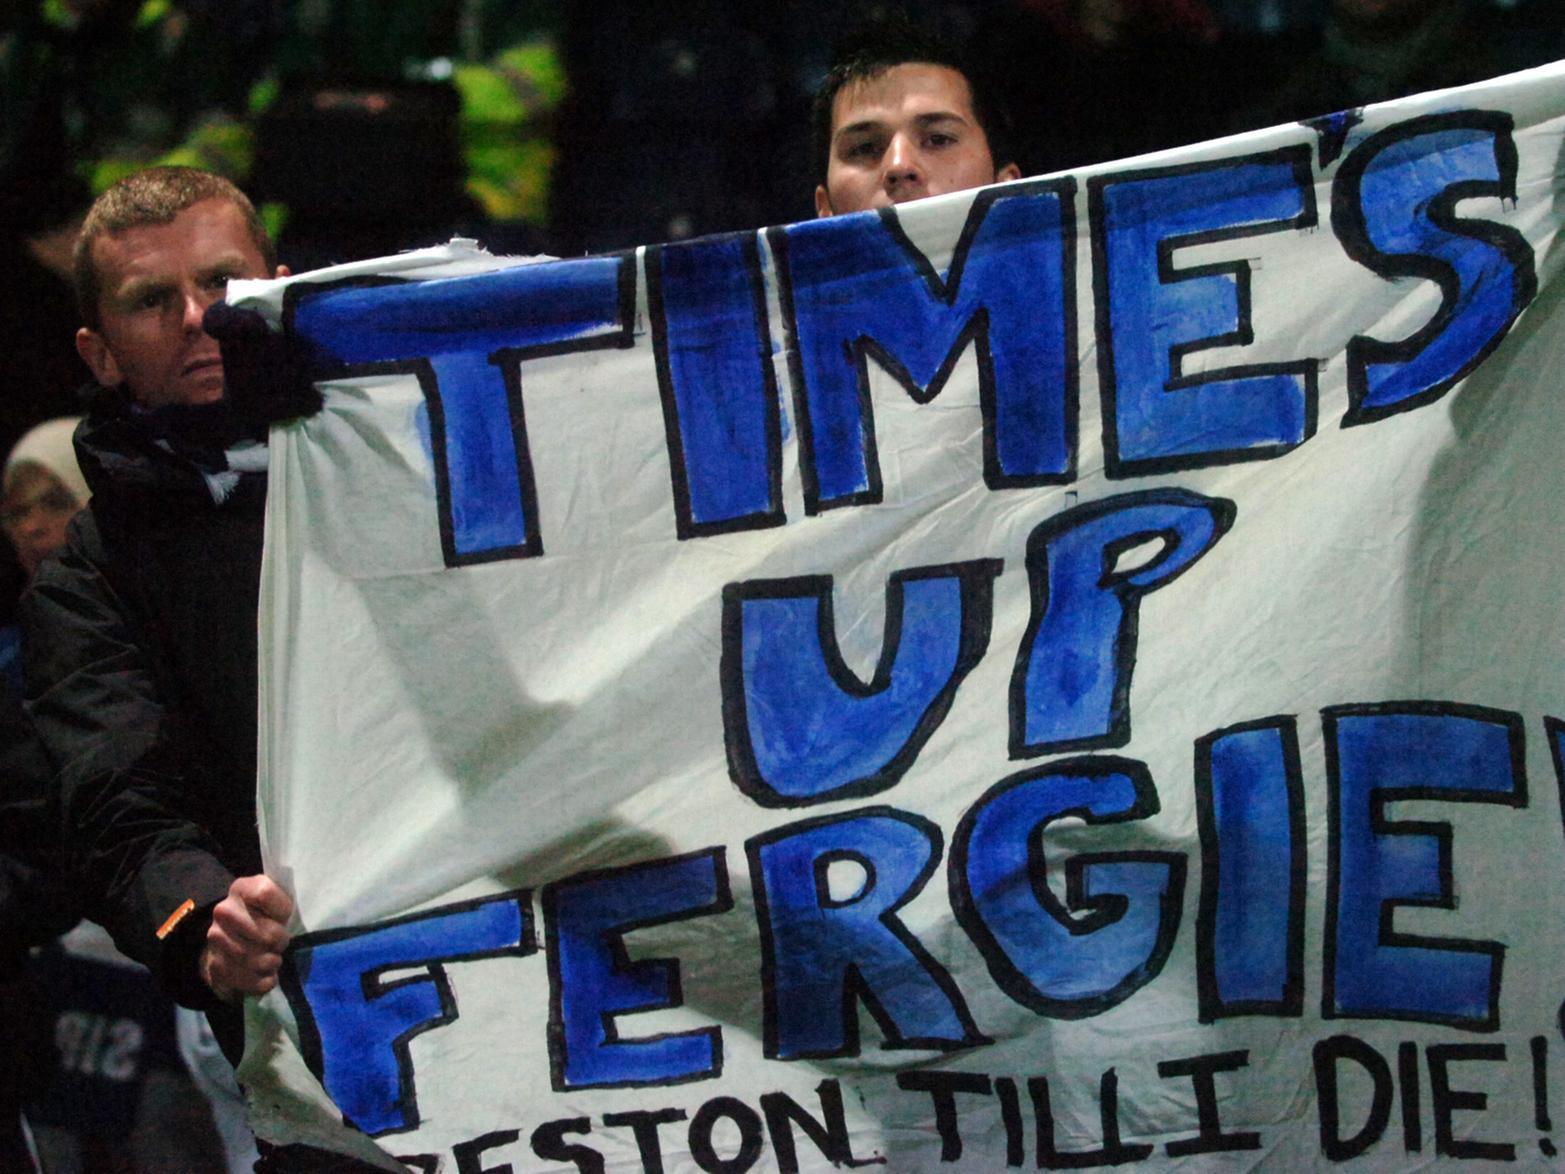 Another from the 2-0 loss in November 2010, Darren Ferguson would last just another month as PNE boss as protests had already begun.